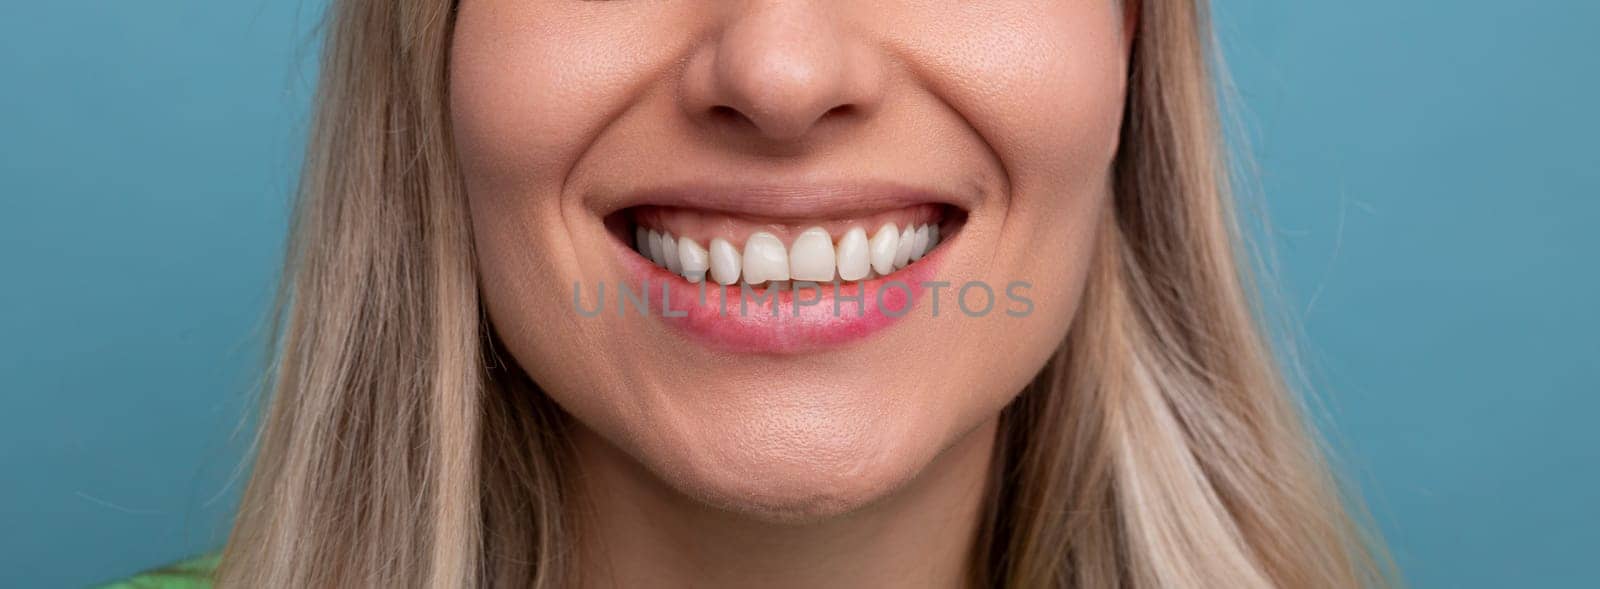 close-up of a female snow-white Hollywood smile on a blue background by TRMK